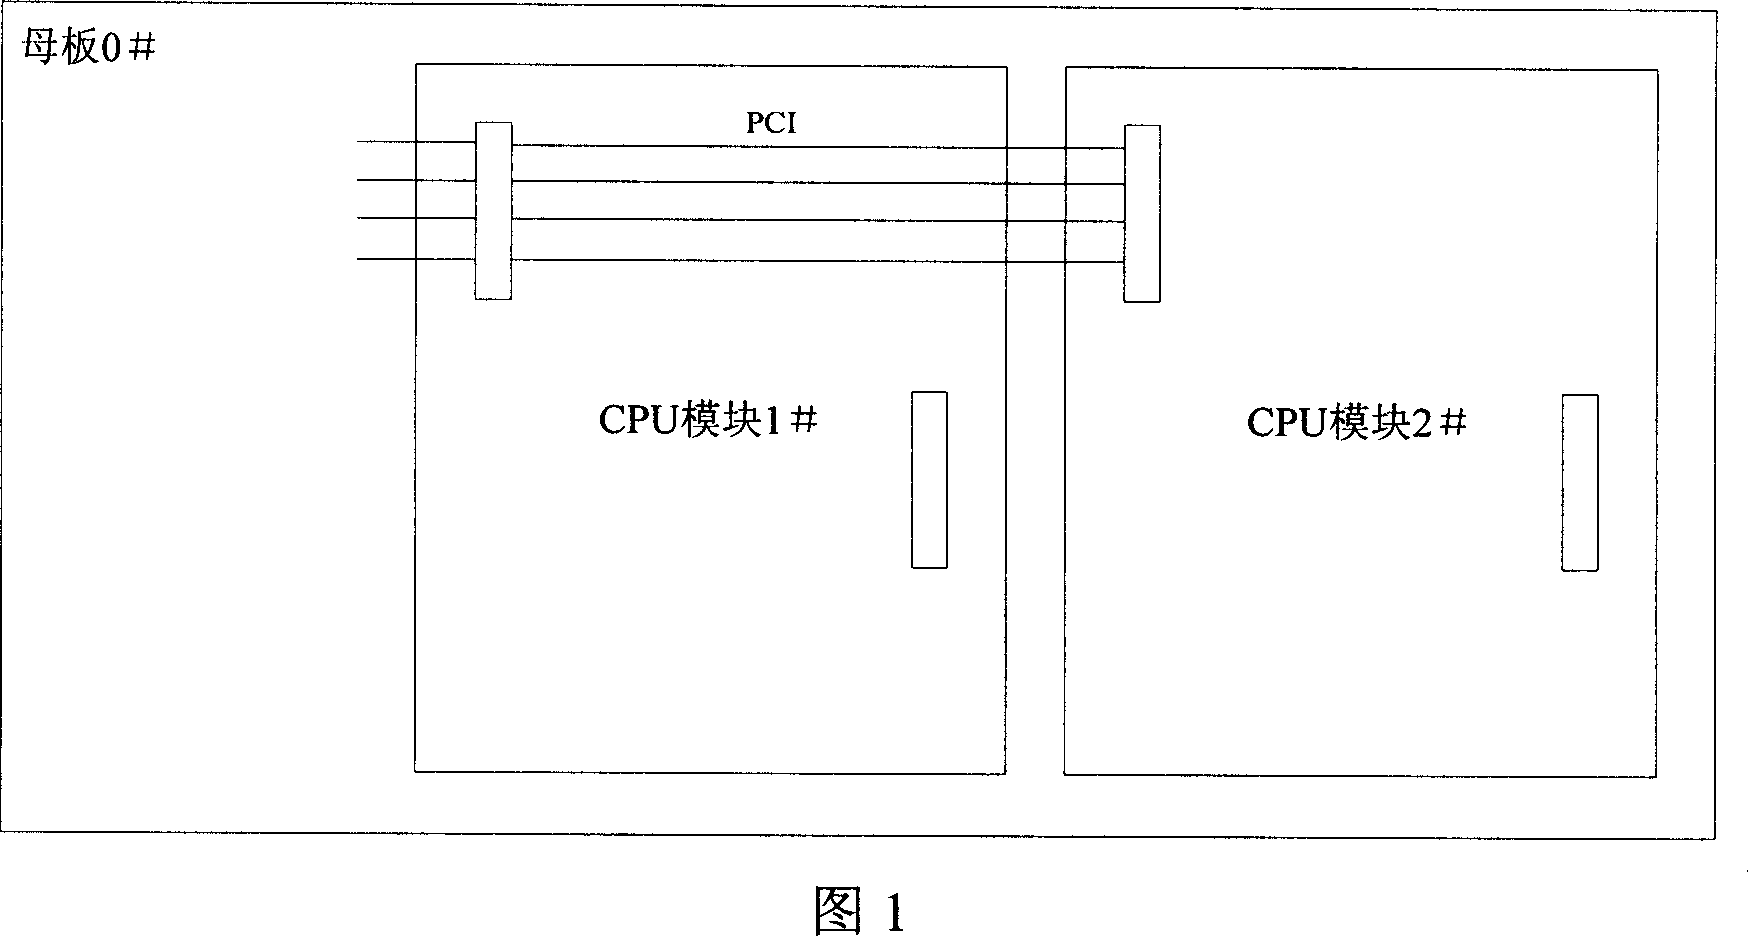 Multi-CPU system of easy expansion